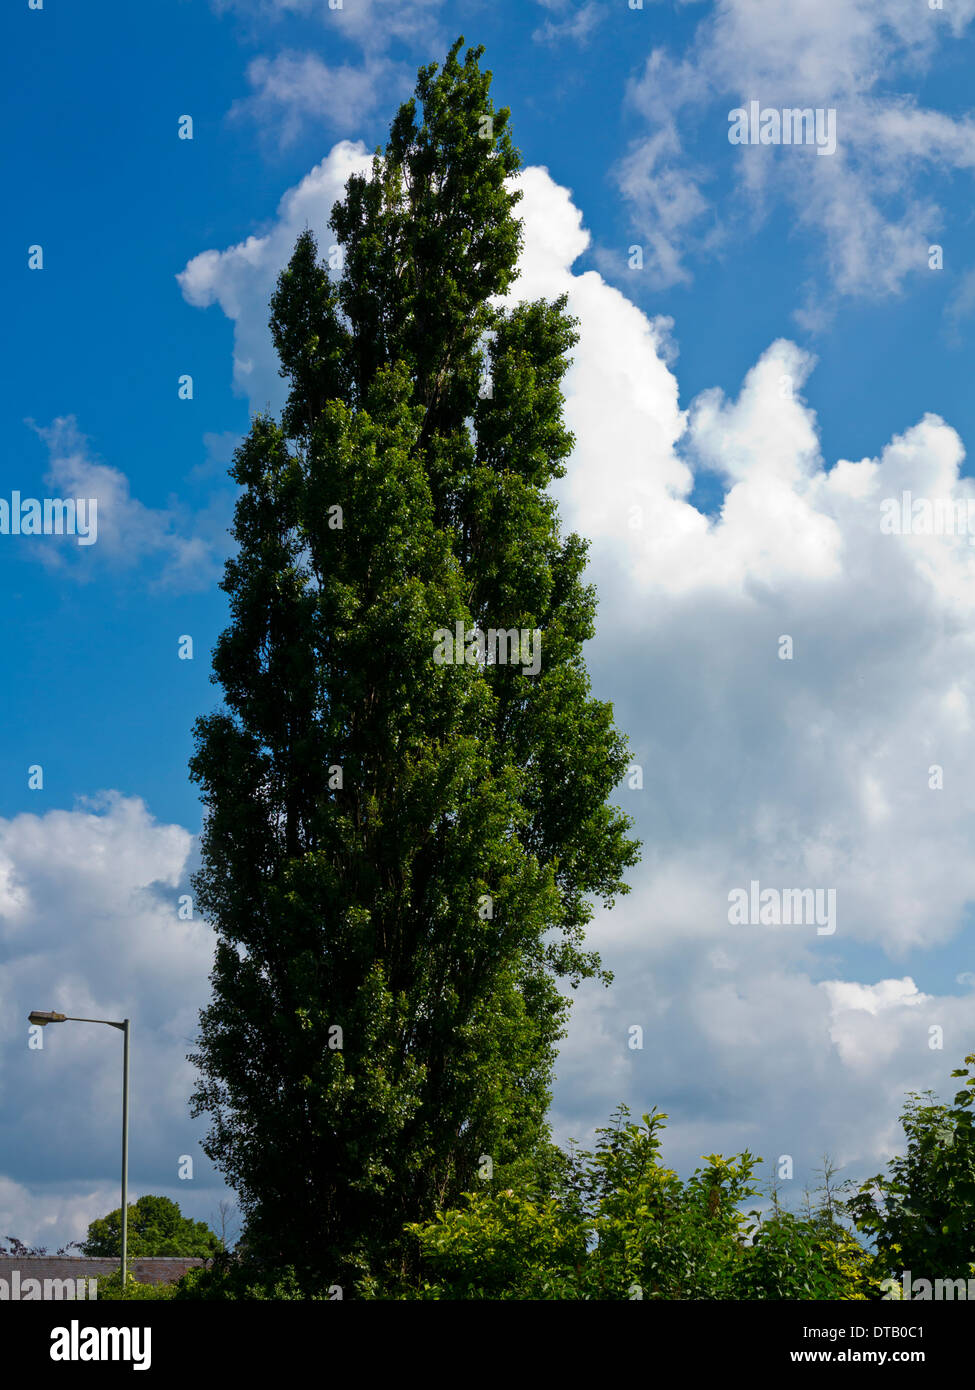 Large leylandii or Leyland cypress Cupressus coniferous tree with blue sky and clouds behind Stock Photo